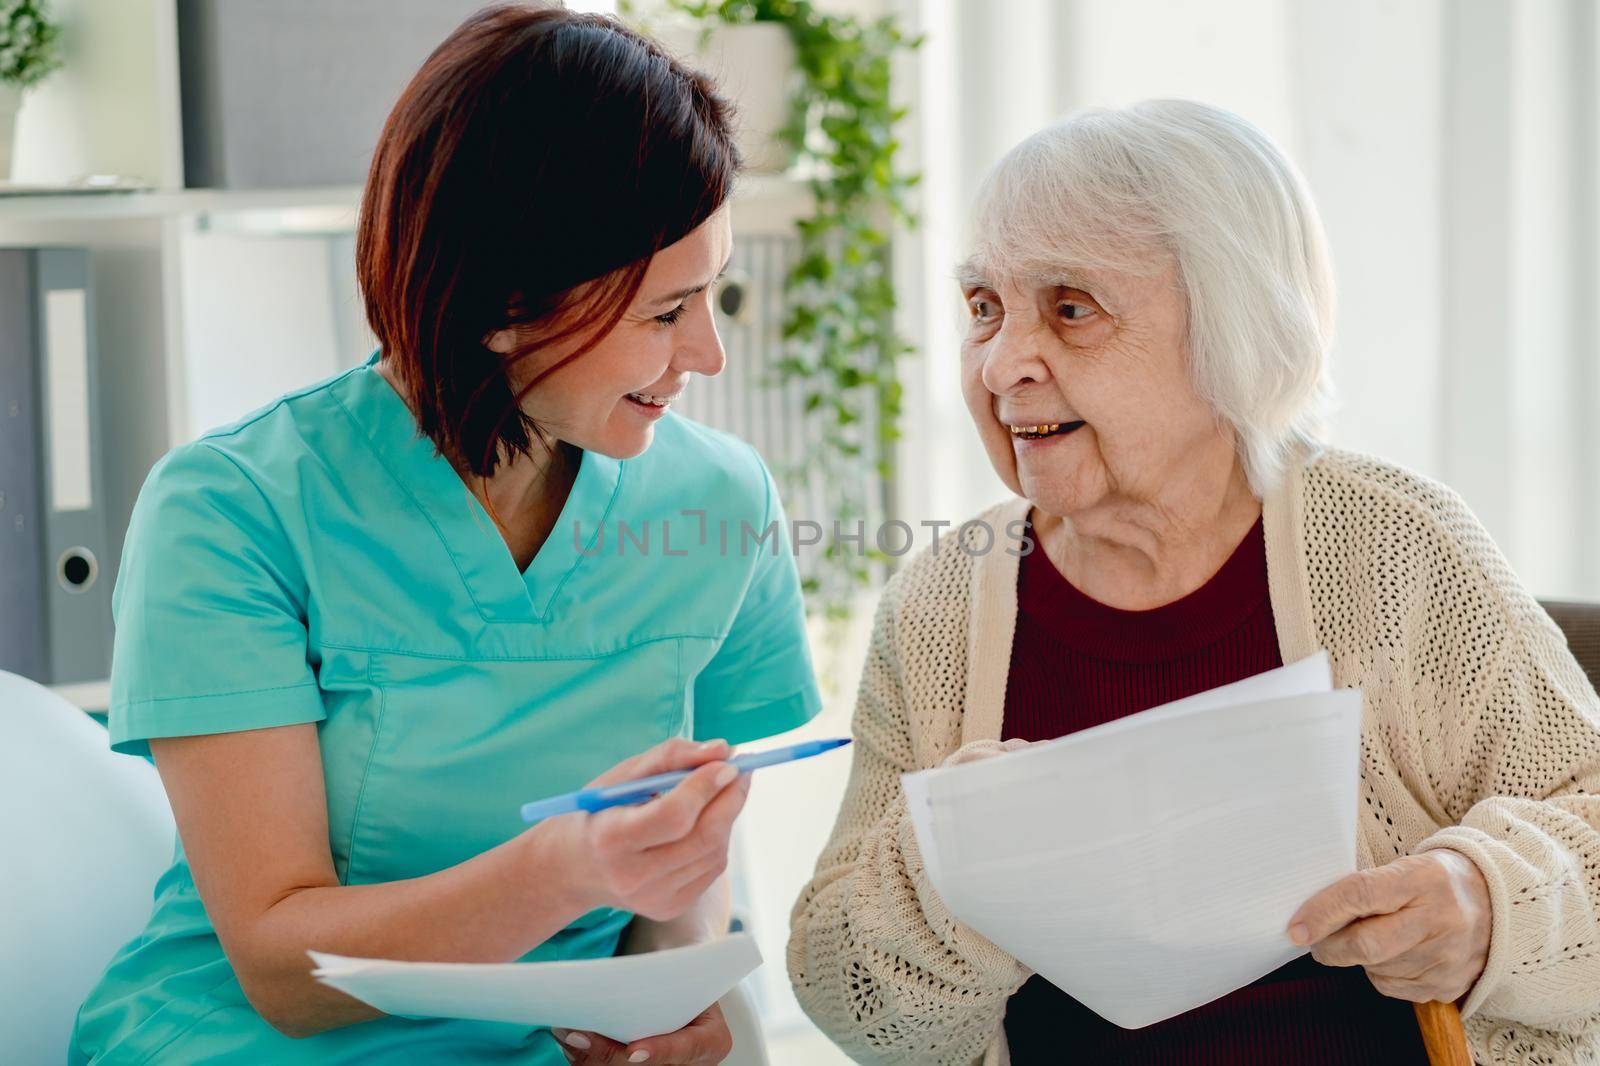 Therapist talking with old woman patient by tan4ikk1